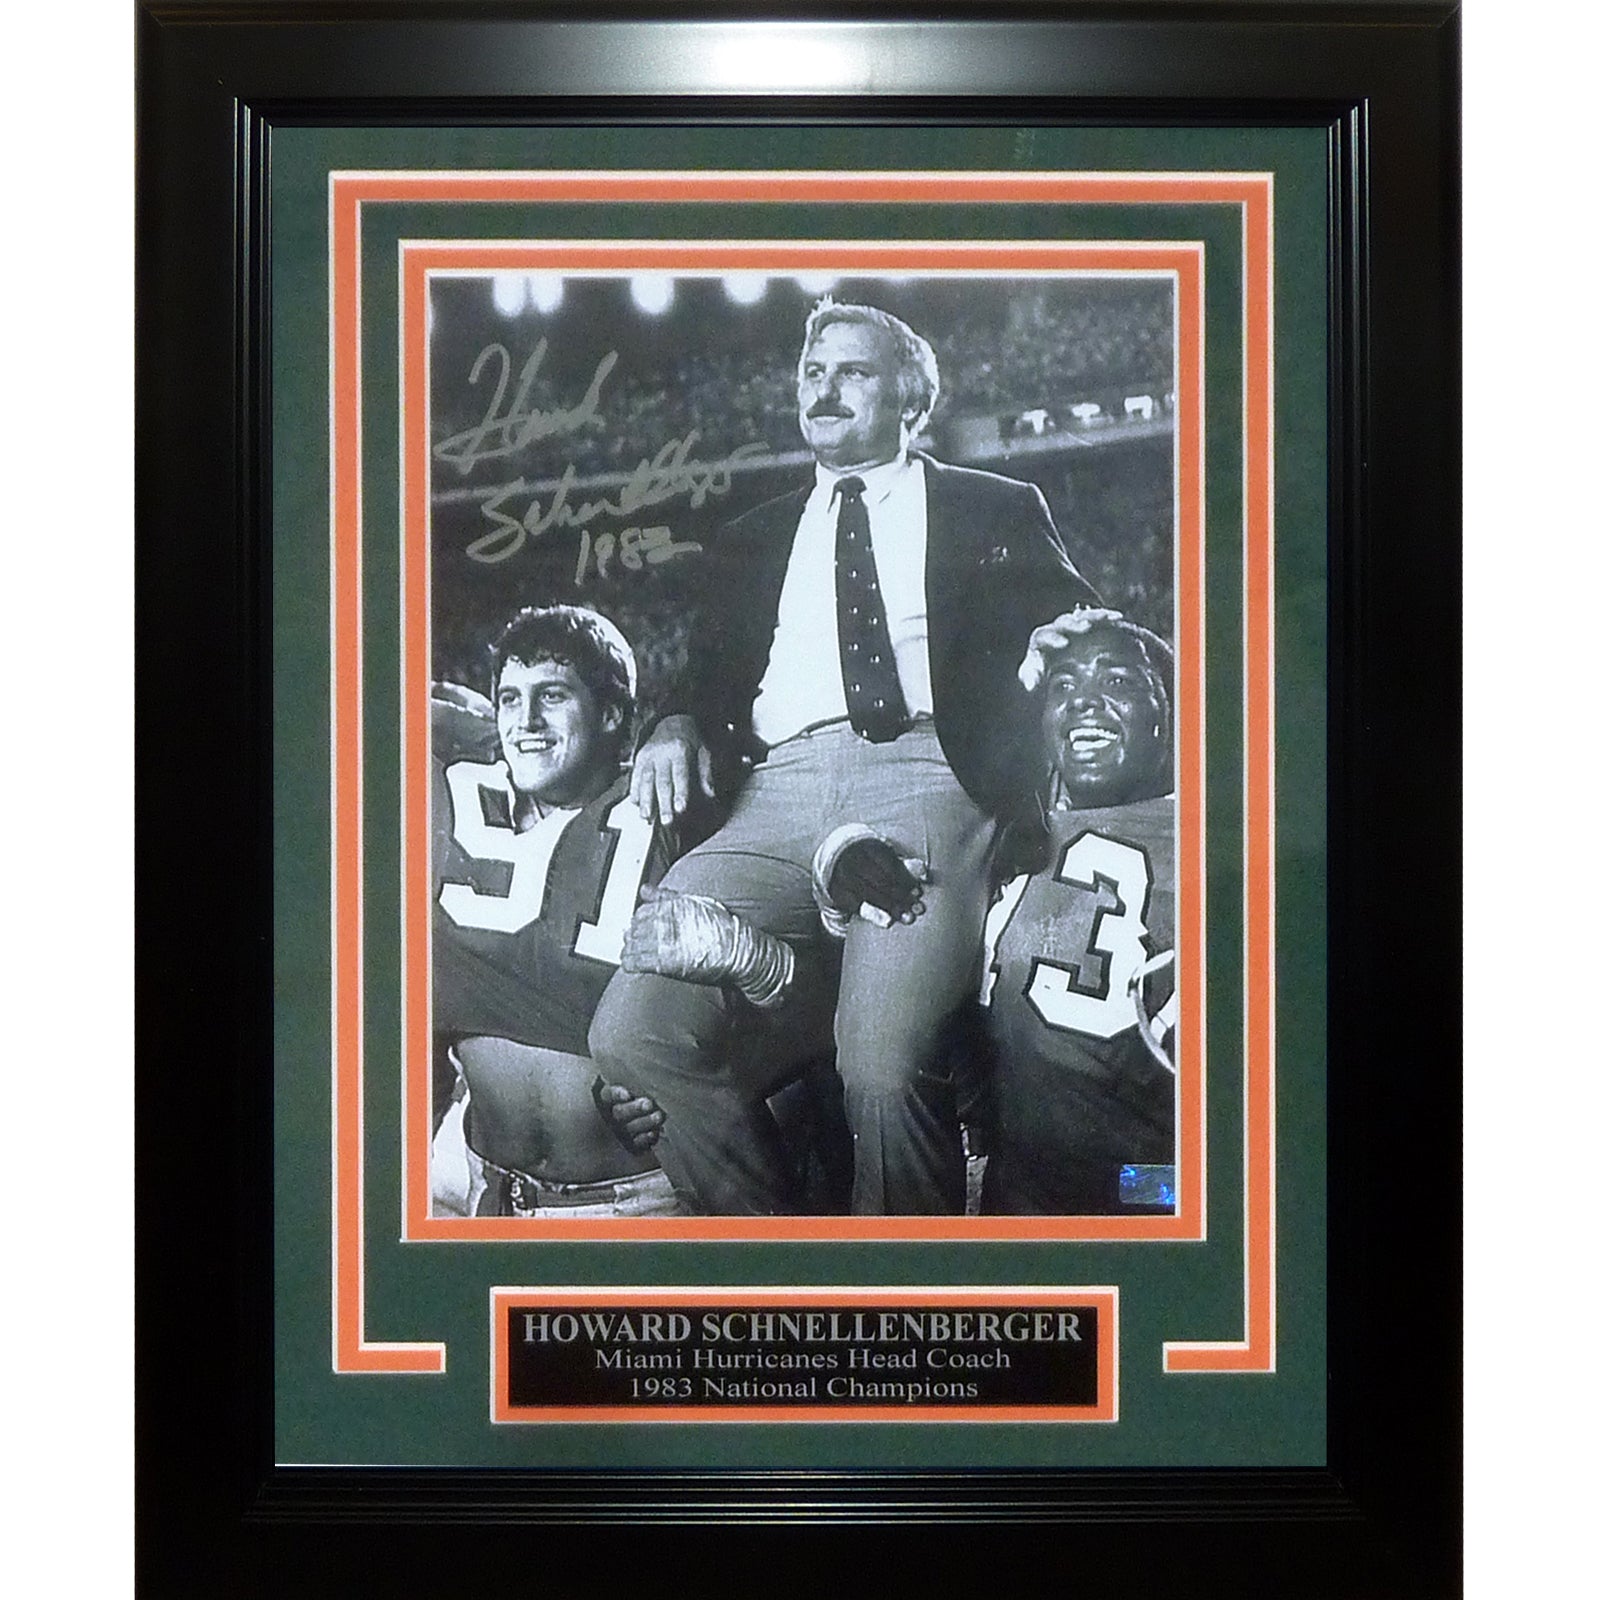 Howard Schnellenberger Autographed Miami Hurricanes (BW on Shoulders) Framed 8x10 Photo w/ 